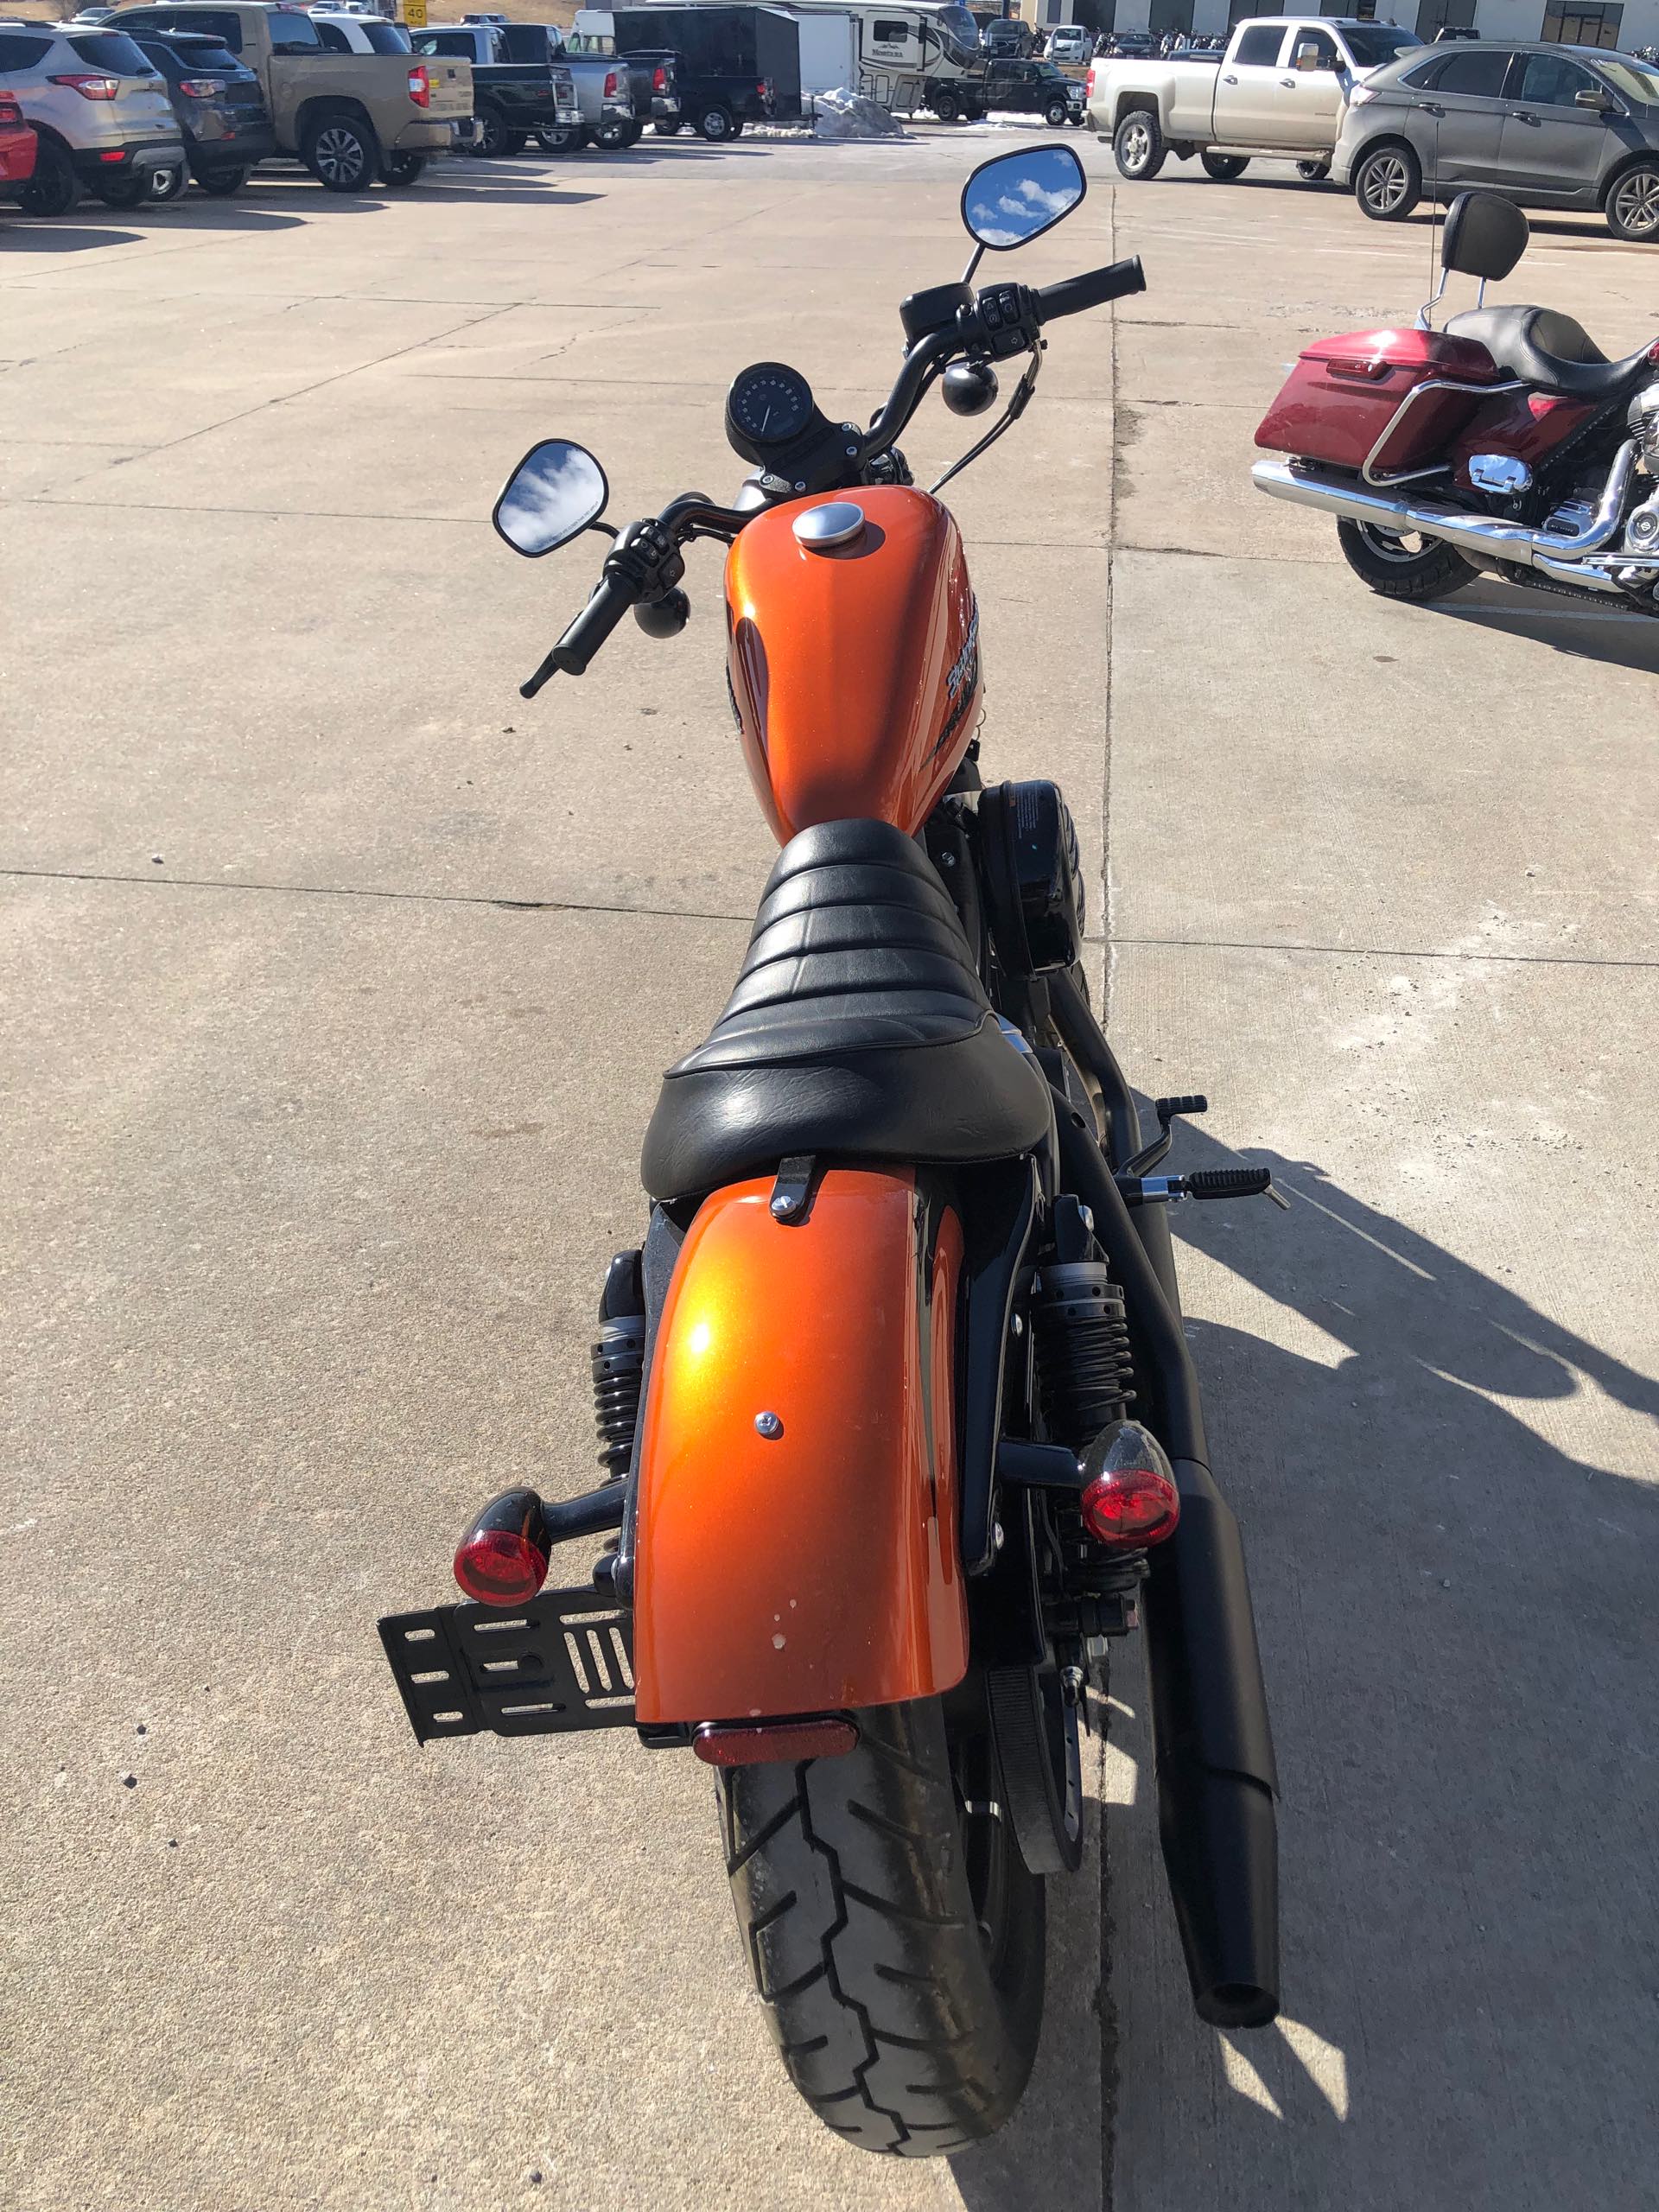 2020 Harley-Davidson Sportster Iron 883 at Head Indian Motorcycle